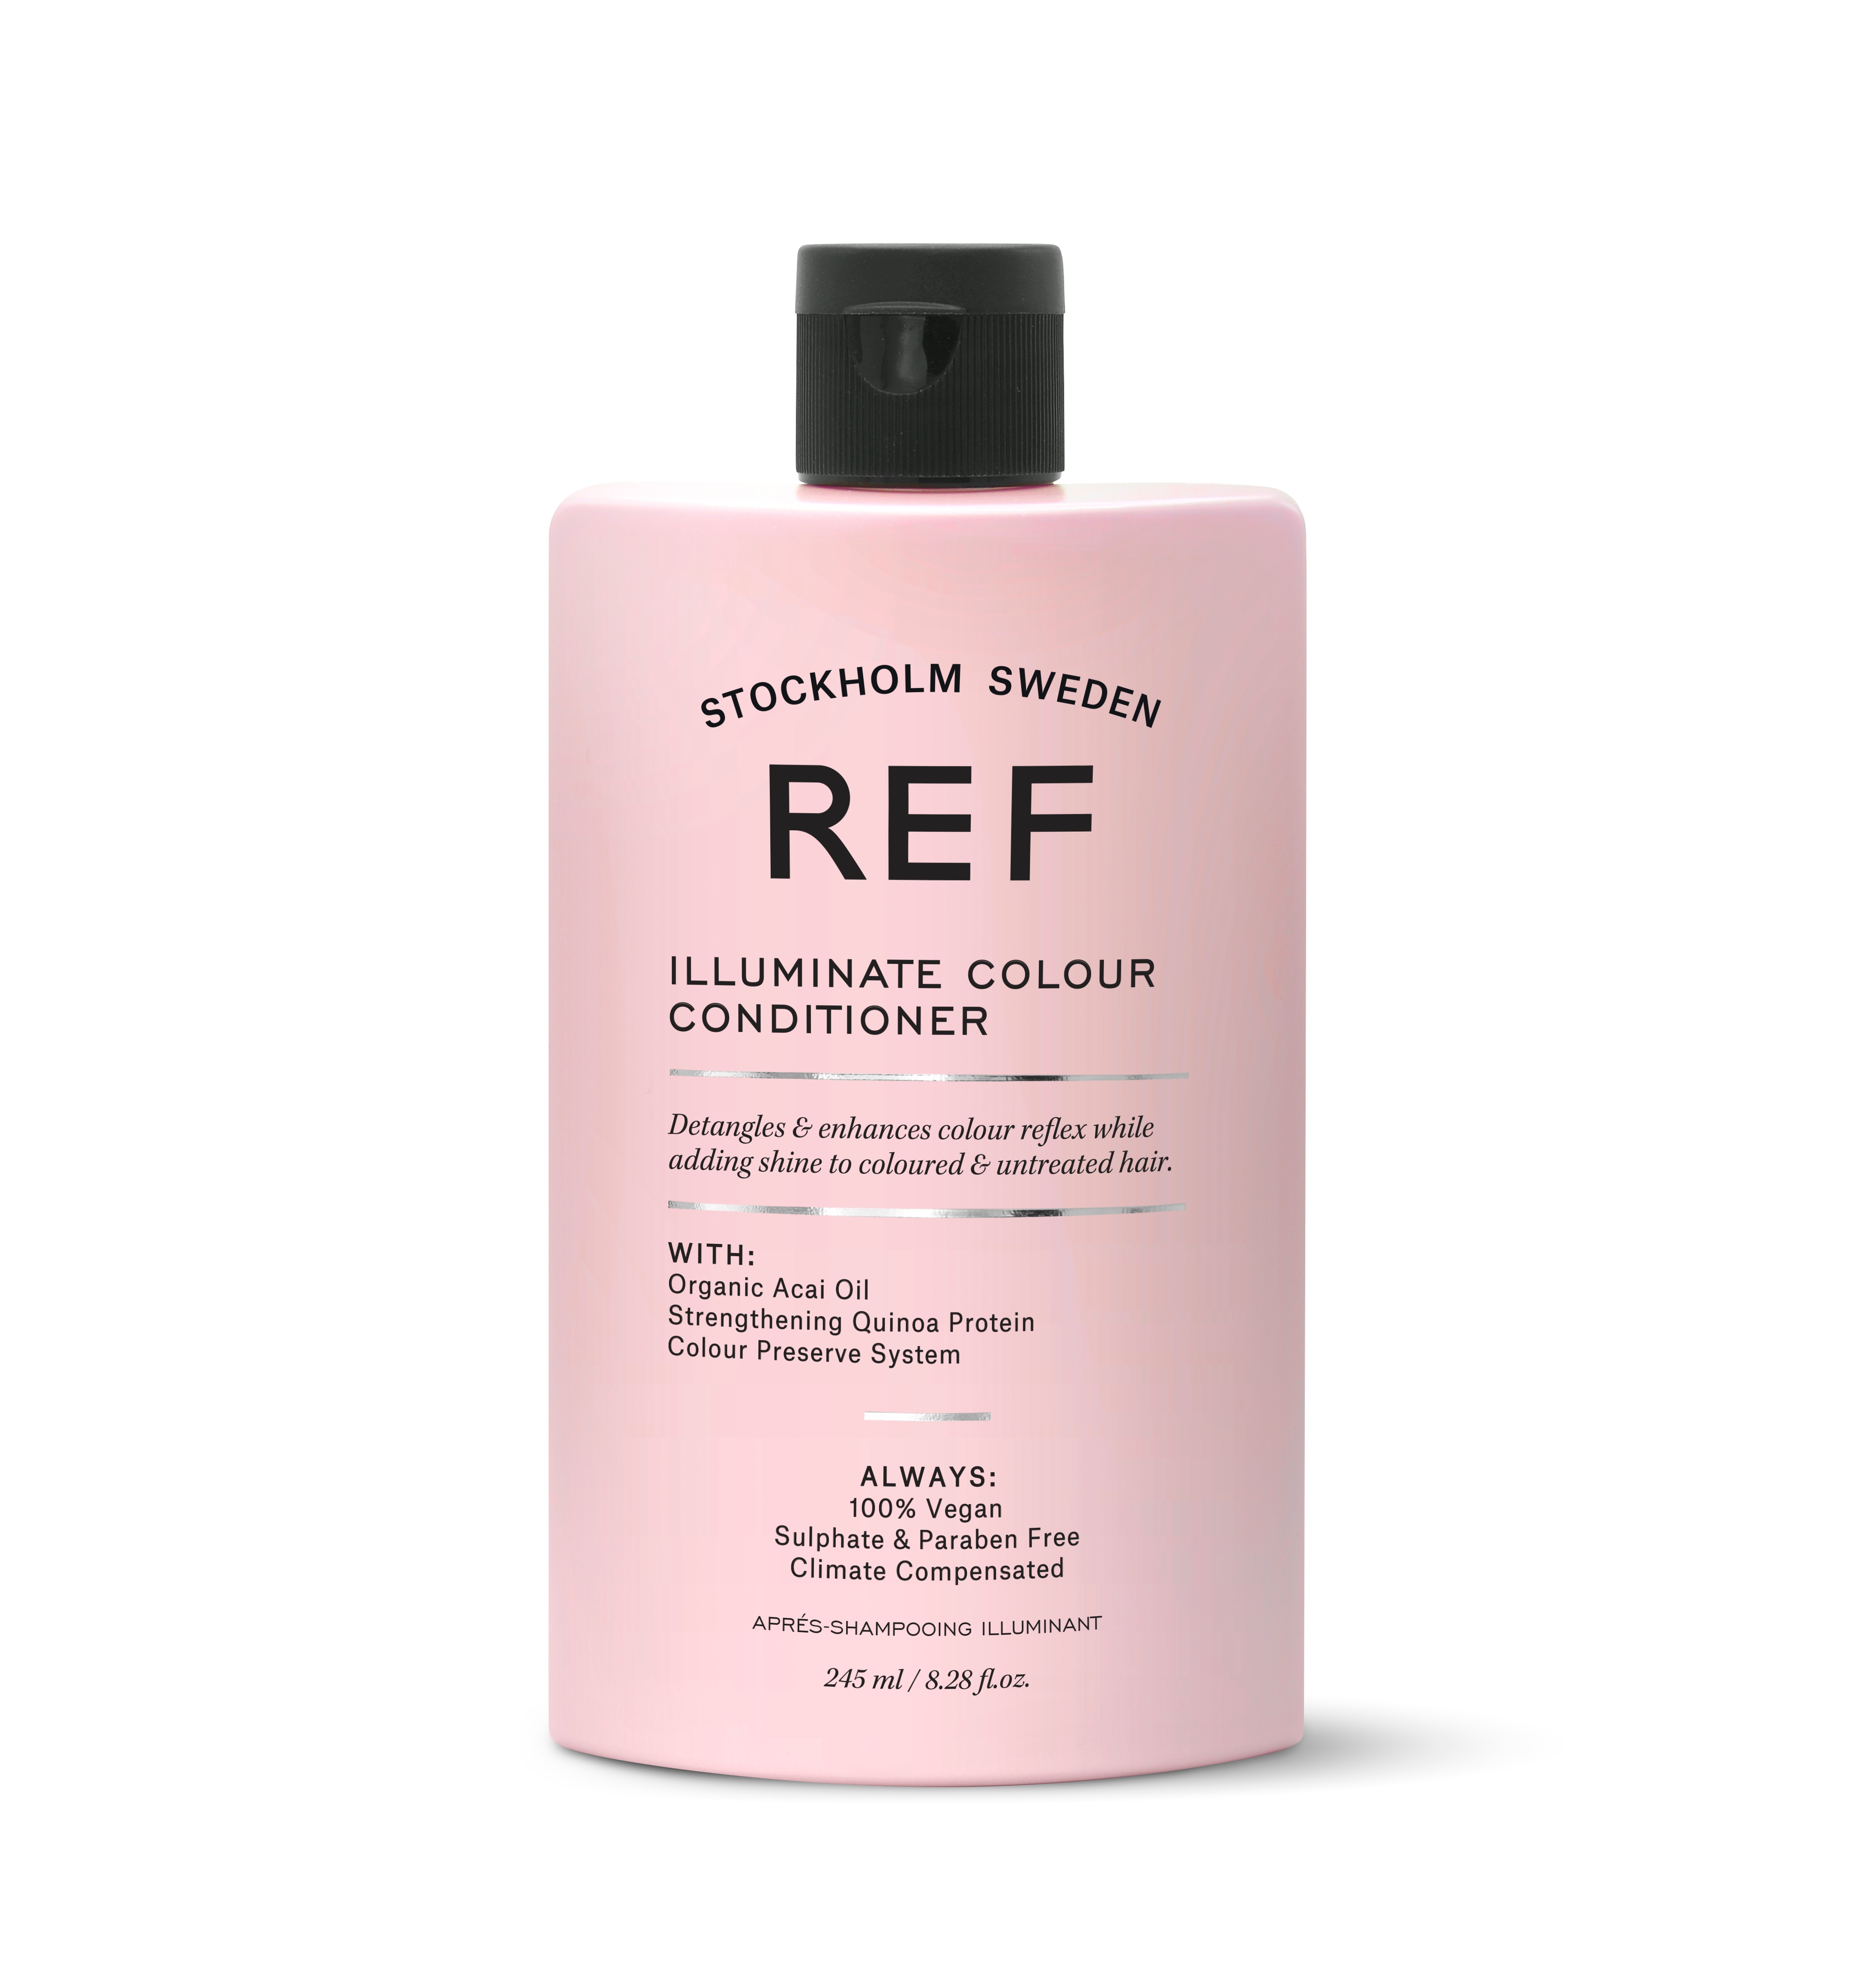 Product image from REF Treatment - Illuminate Colour Conditioner